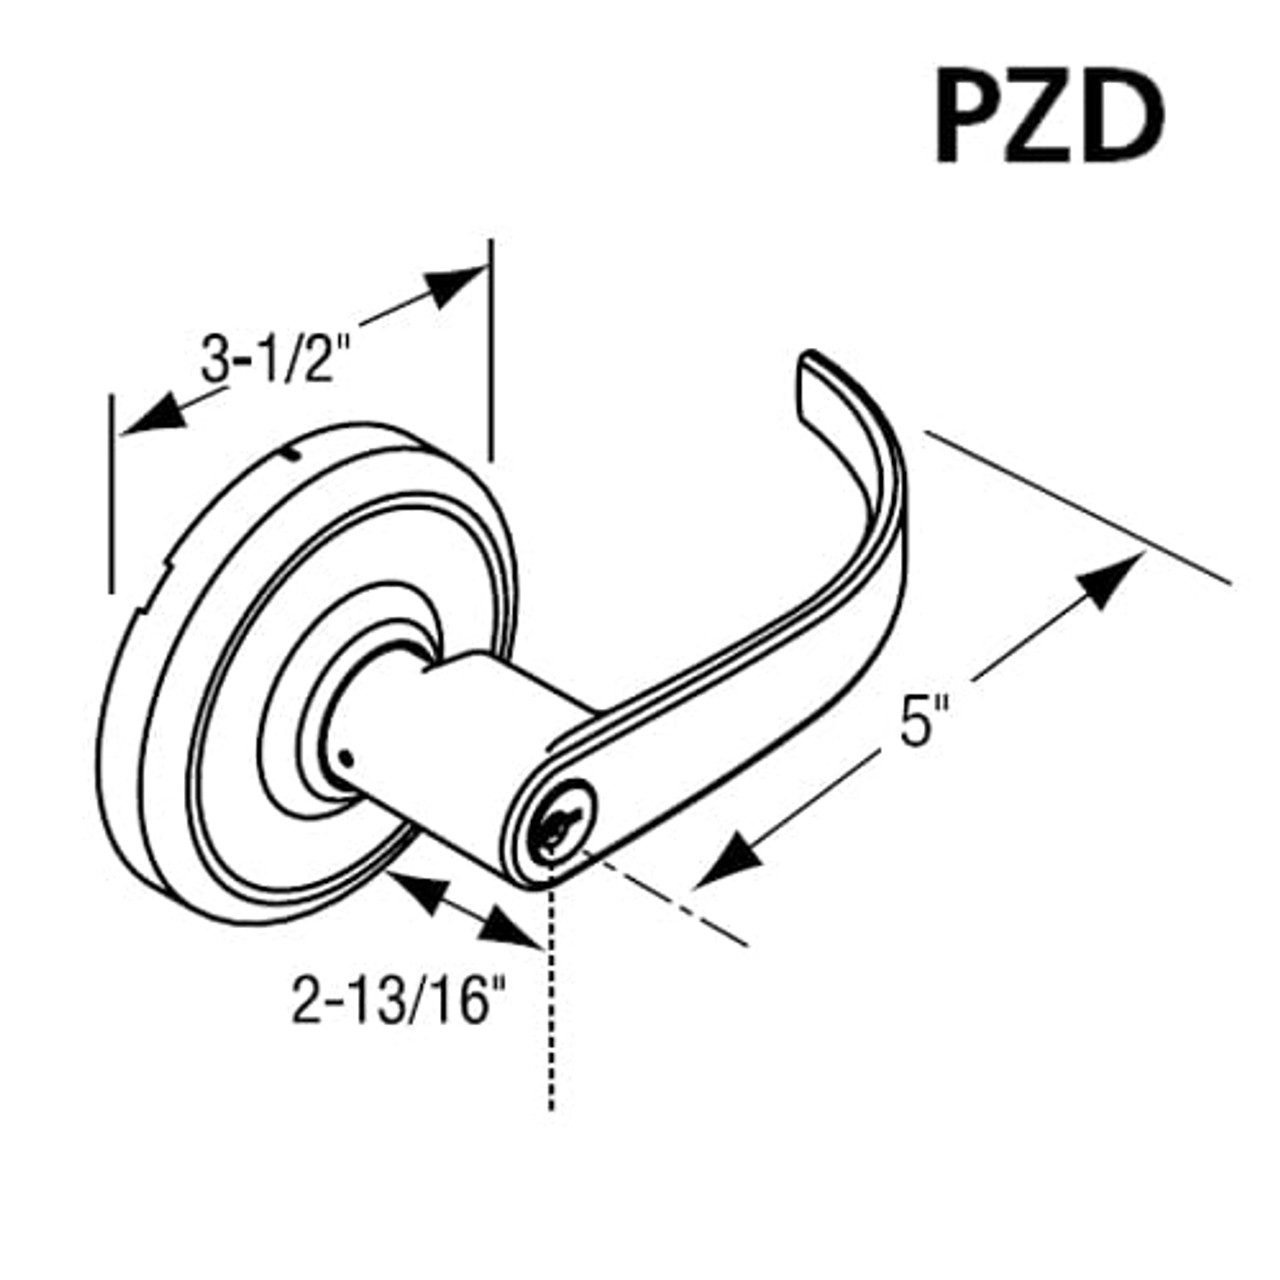 CL3861-PZD-612 Corbin CL3800 Series Standard-Duty Office Cylindrical Locksets with Princeton Lever in Satin Bronze